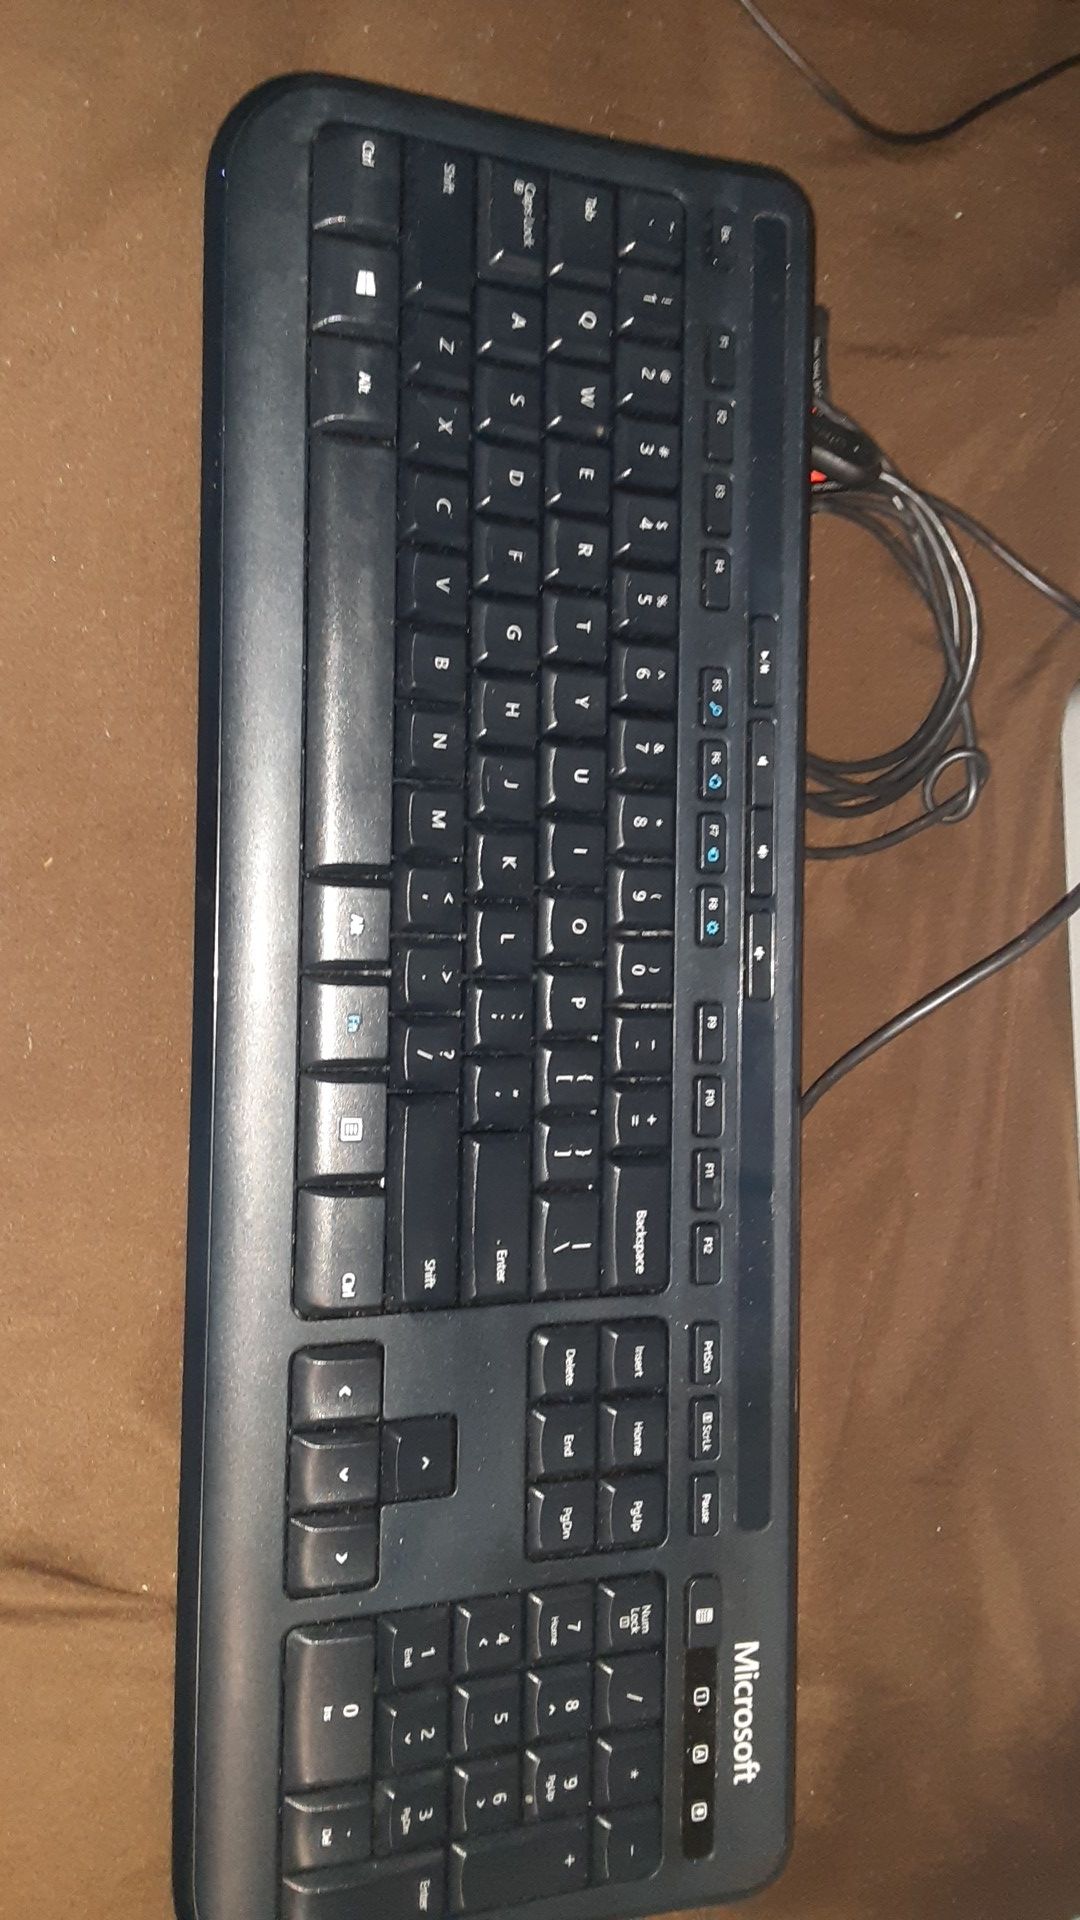 Microsoft Keyboard, and gaming mouse.